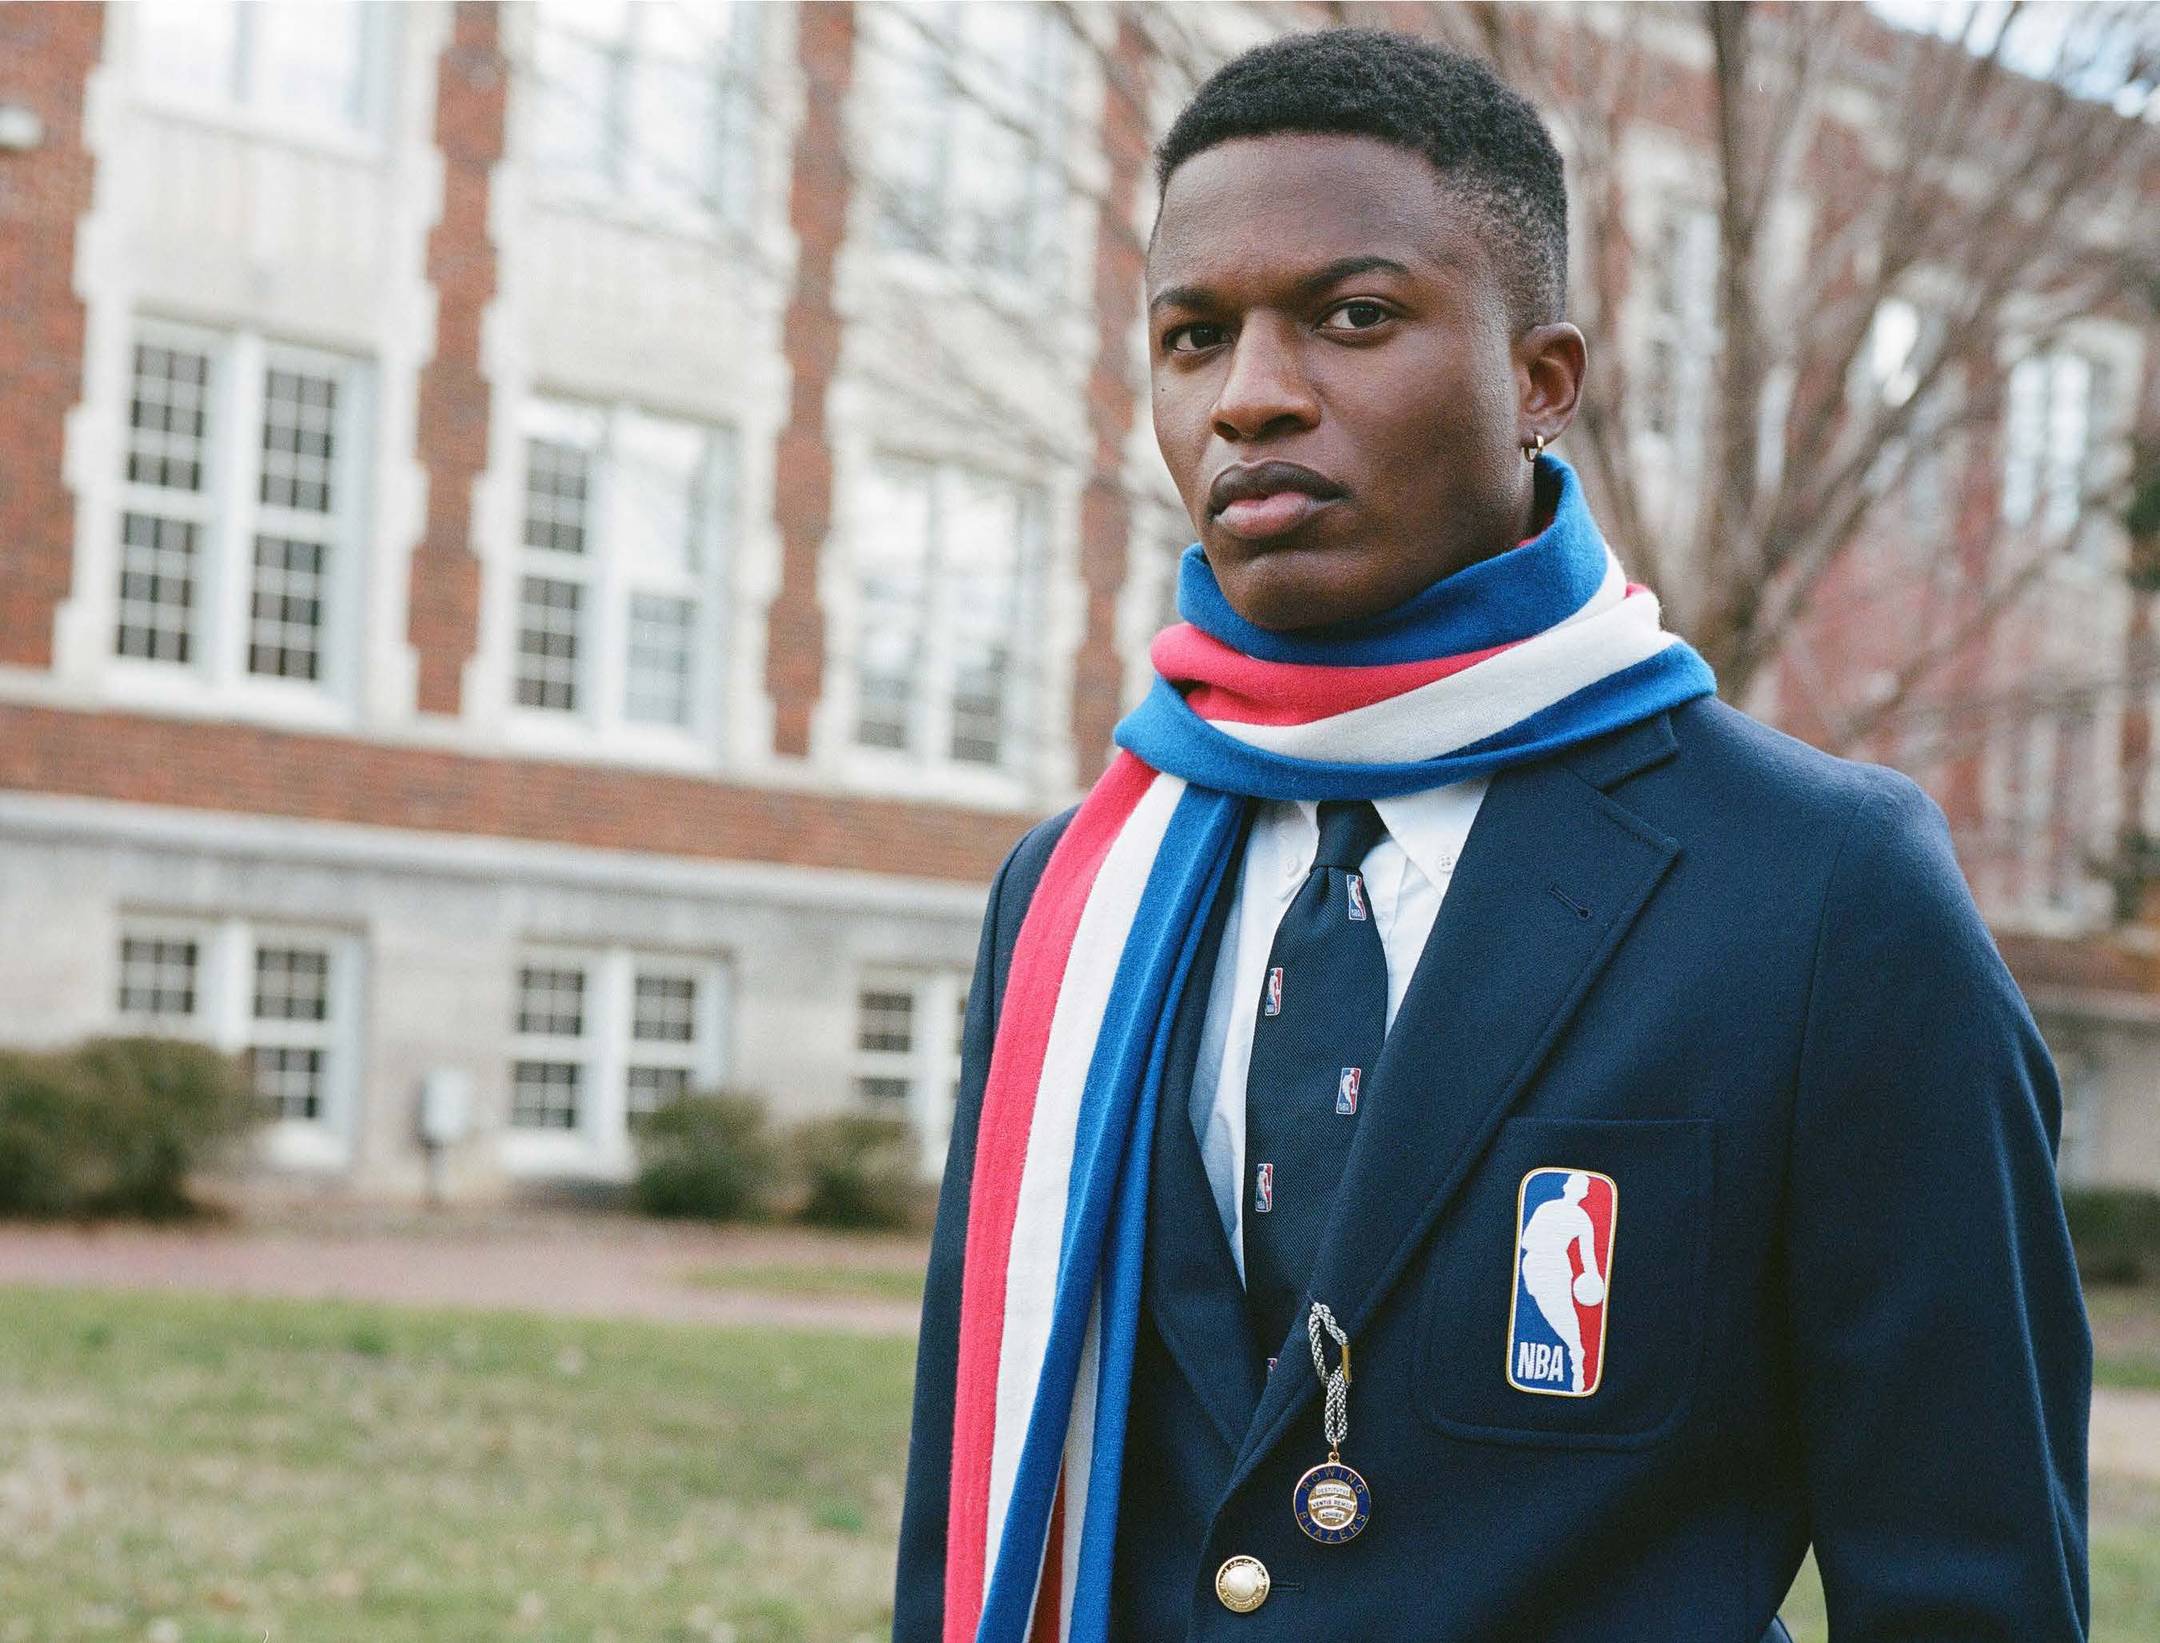 Model wearing the NBA Logo Scarf, Tie, and Blazer outside of The Graduate Chapel Hill.